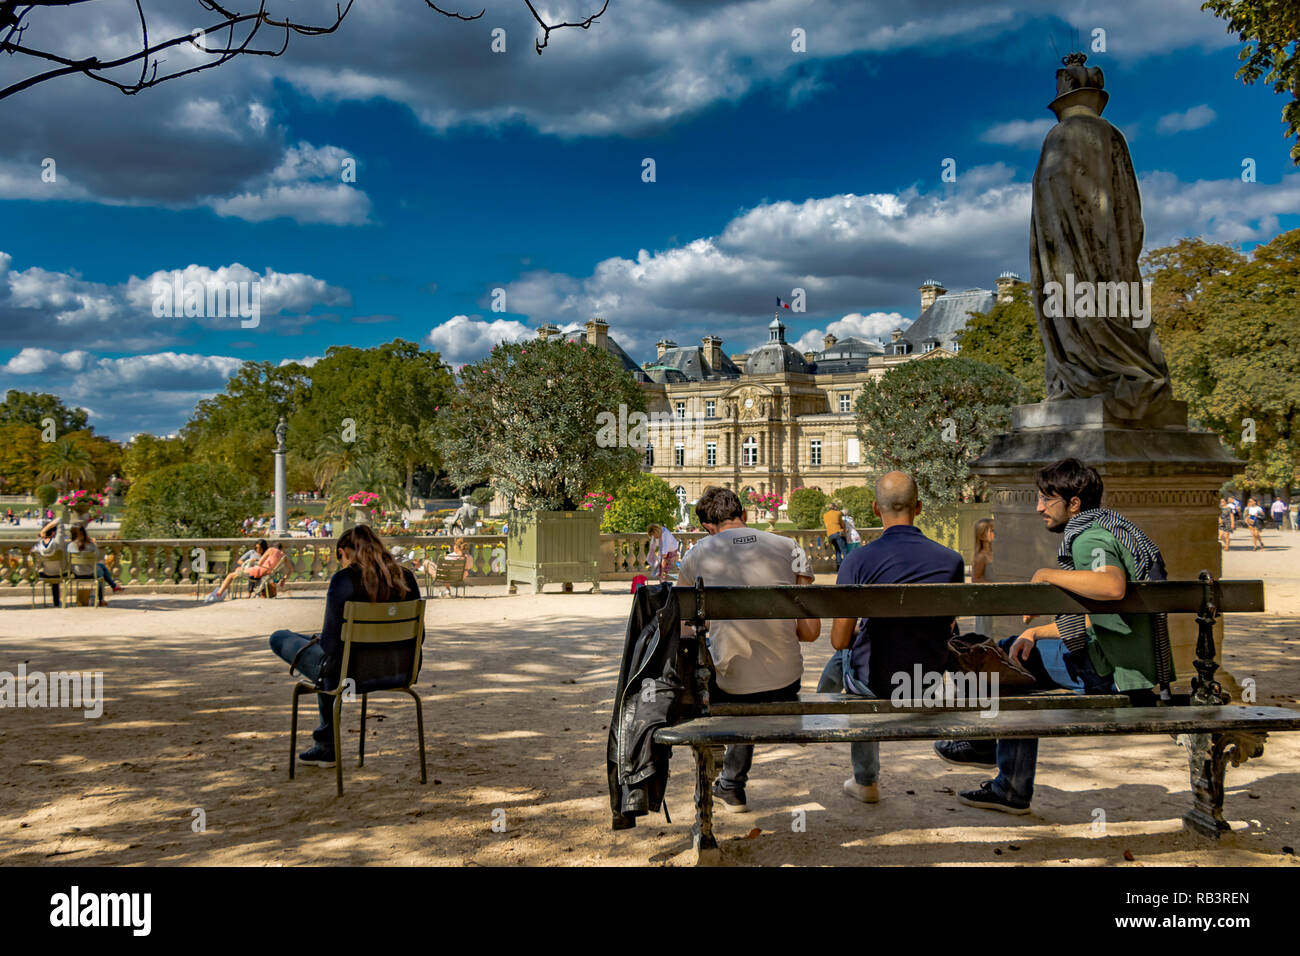 A girl sits on a green chair checking her phone whist nearby three men sit on a bench relaxing on a summer's day in the Jardin du Luxembourg,Paris, Stock Photo